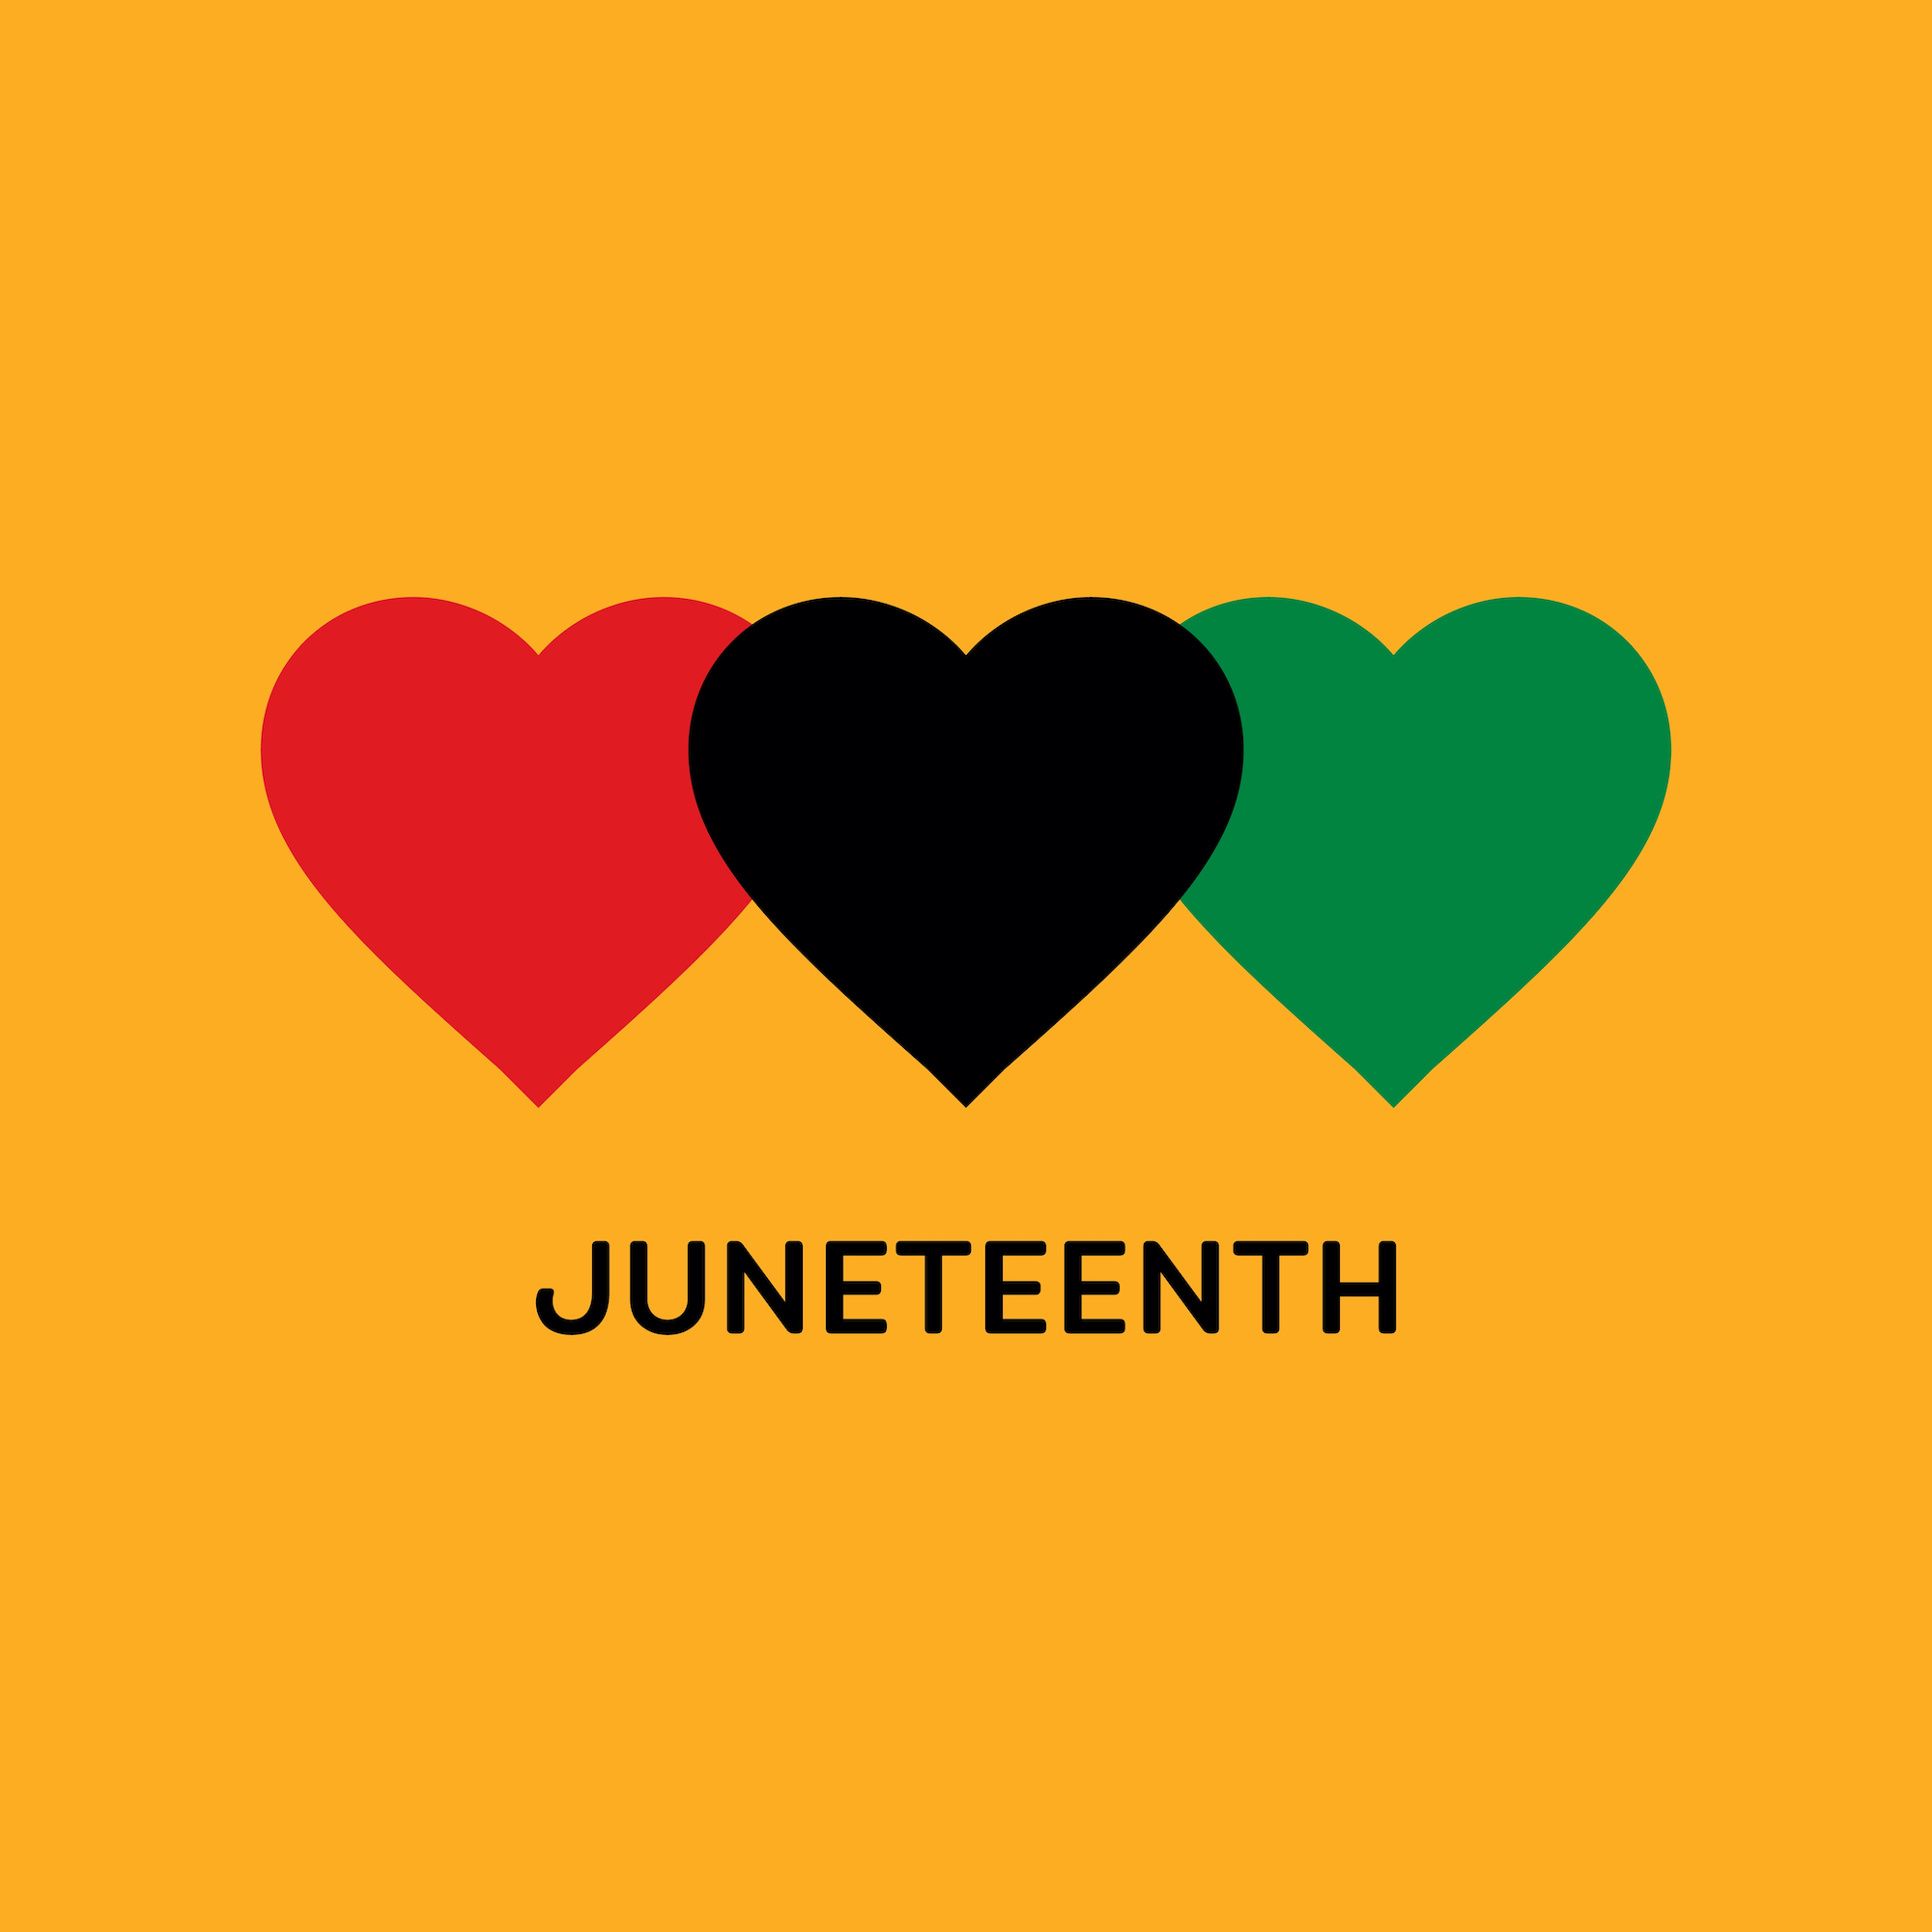 How We Can Show Support on Juneteenth